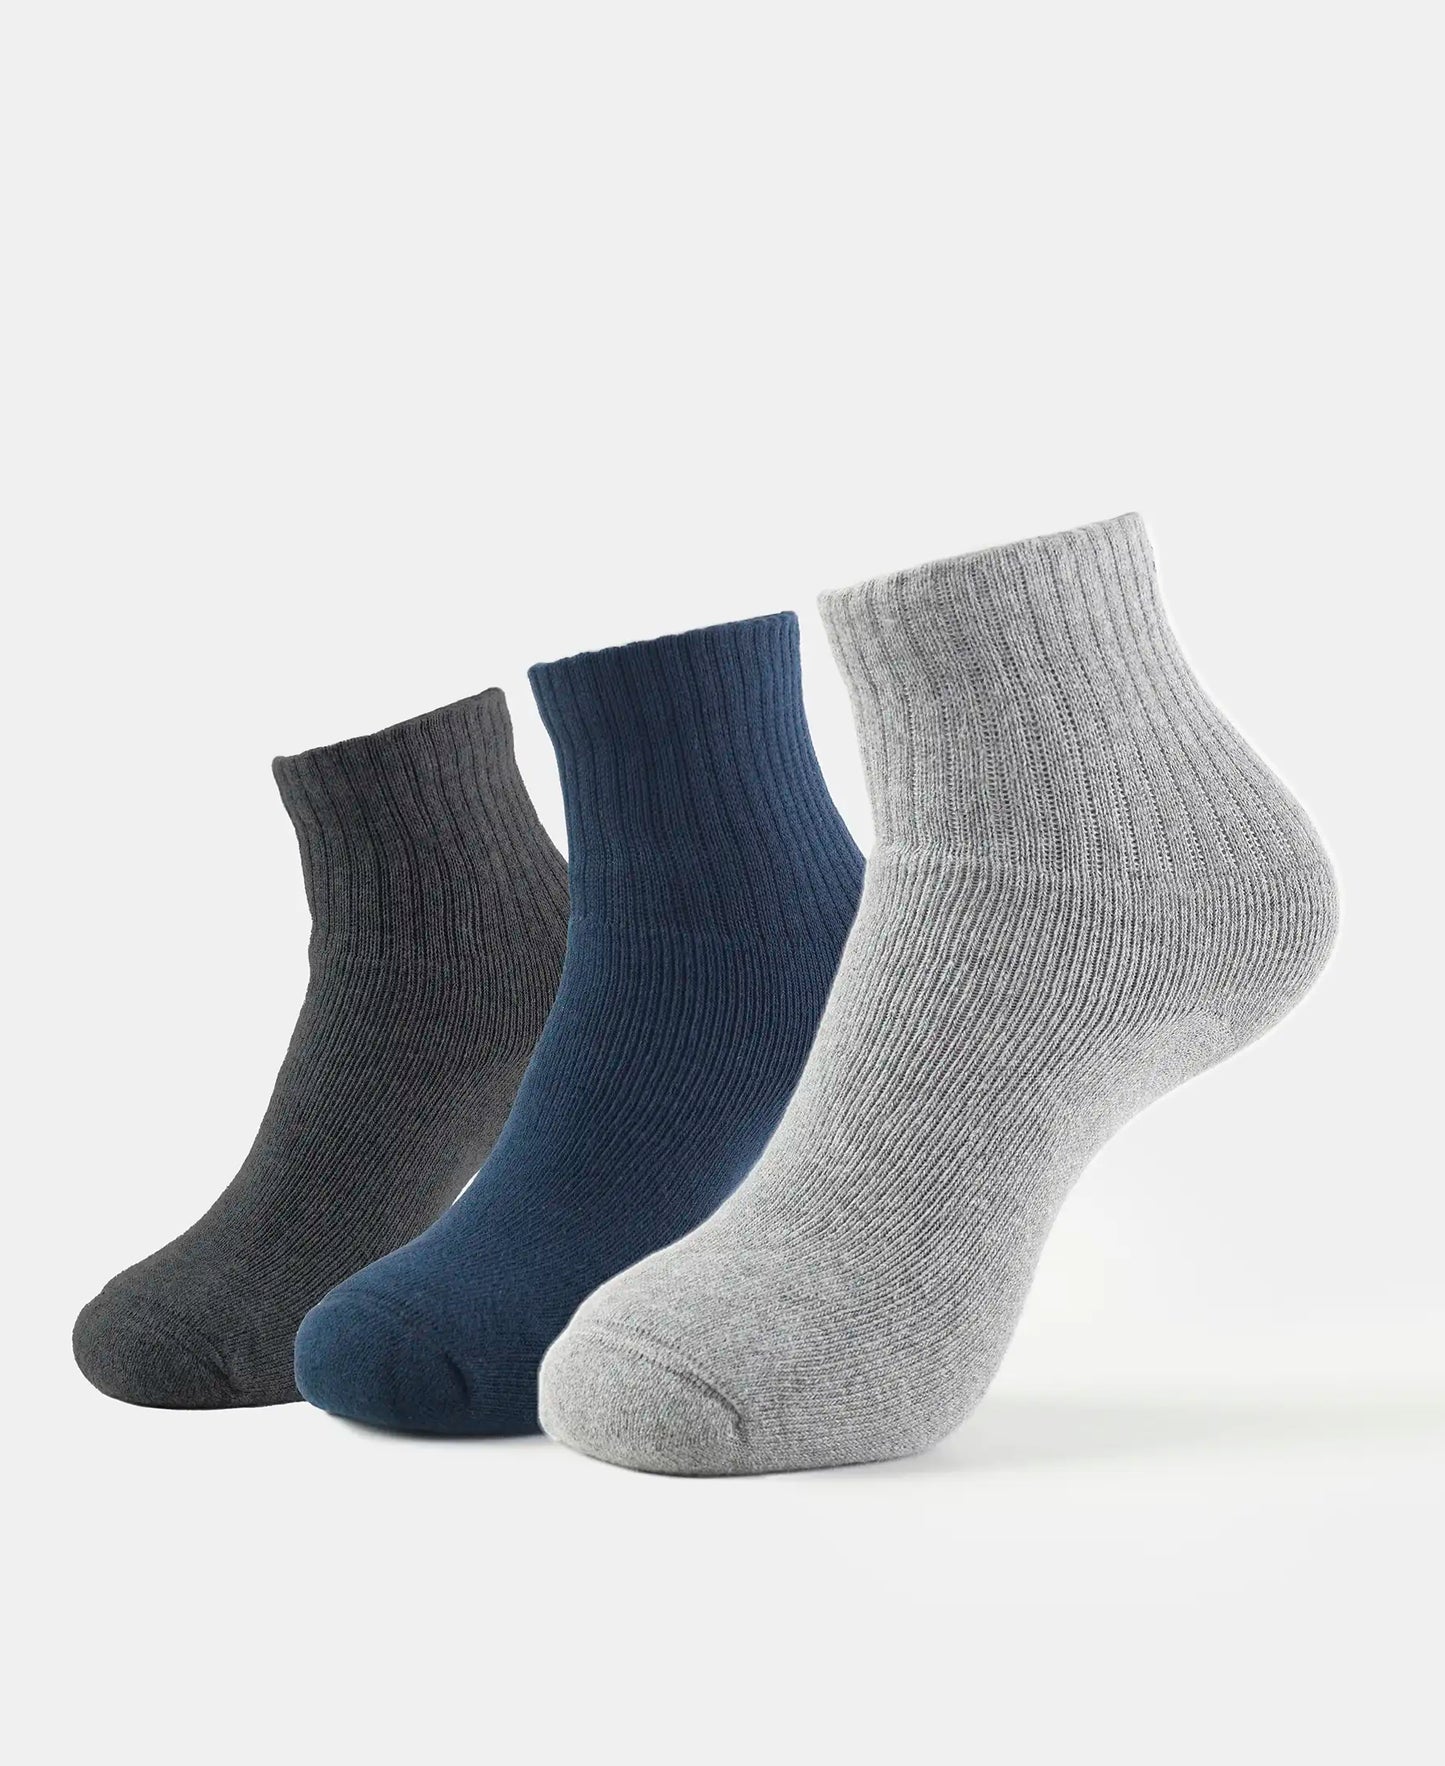 Compact Cotton Terry Ankle Length Socks With StayFresh Treatment - Black/Midgrey Melange/Navy (Pack of 3)